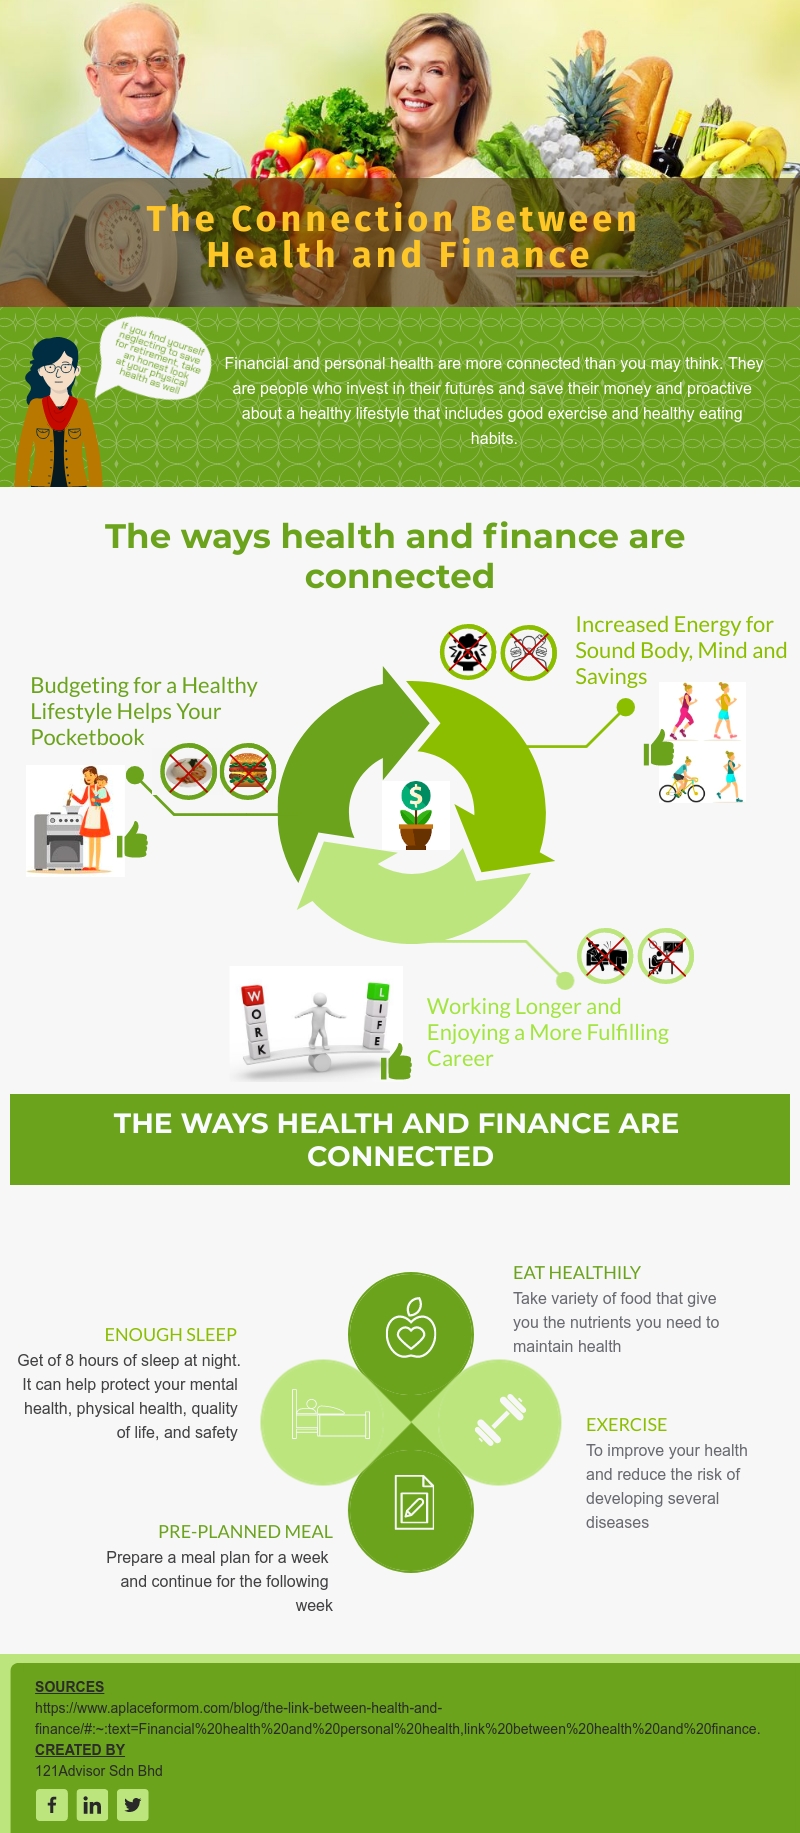 The-Connection-Between-Health-and-Finance.jpg